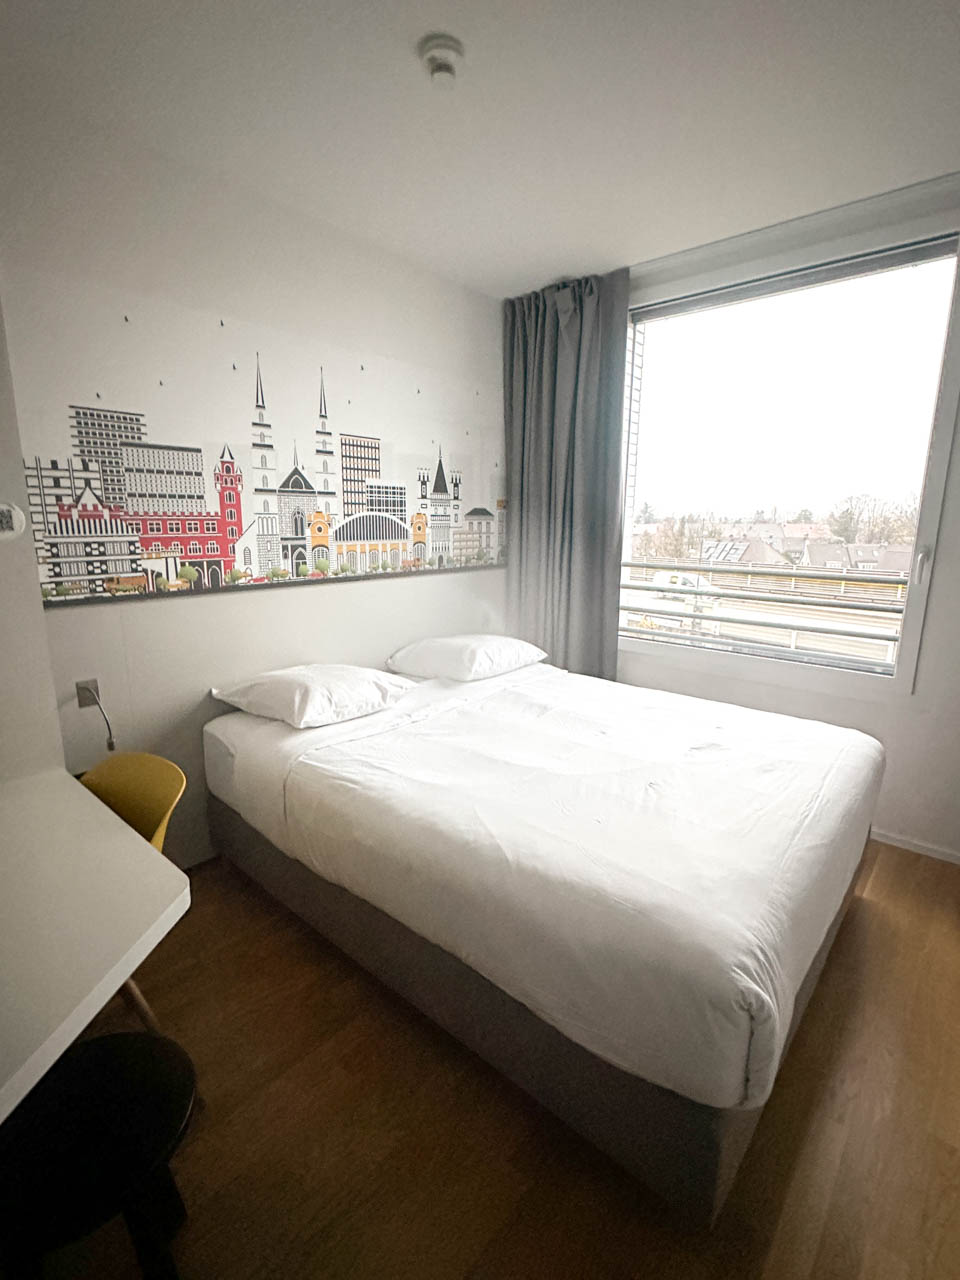 A minimalistic hotel room at B&B Hotel Basel with a large bed and a striking wall mural of Basel's skyline